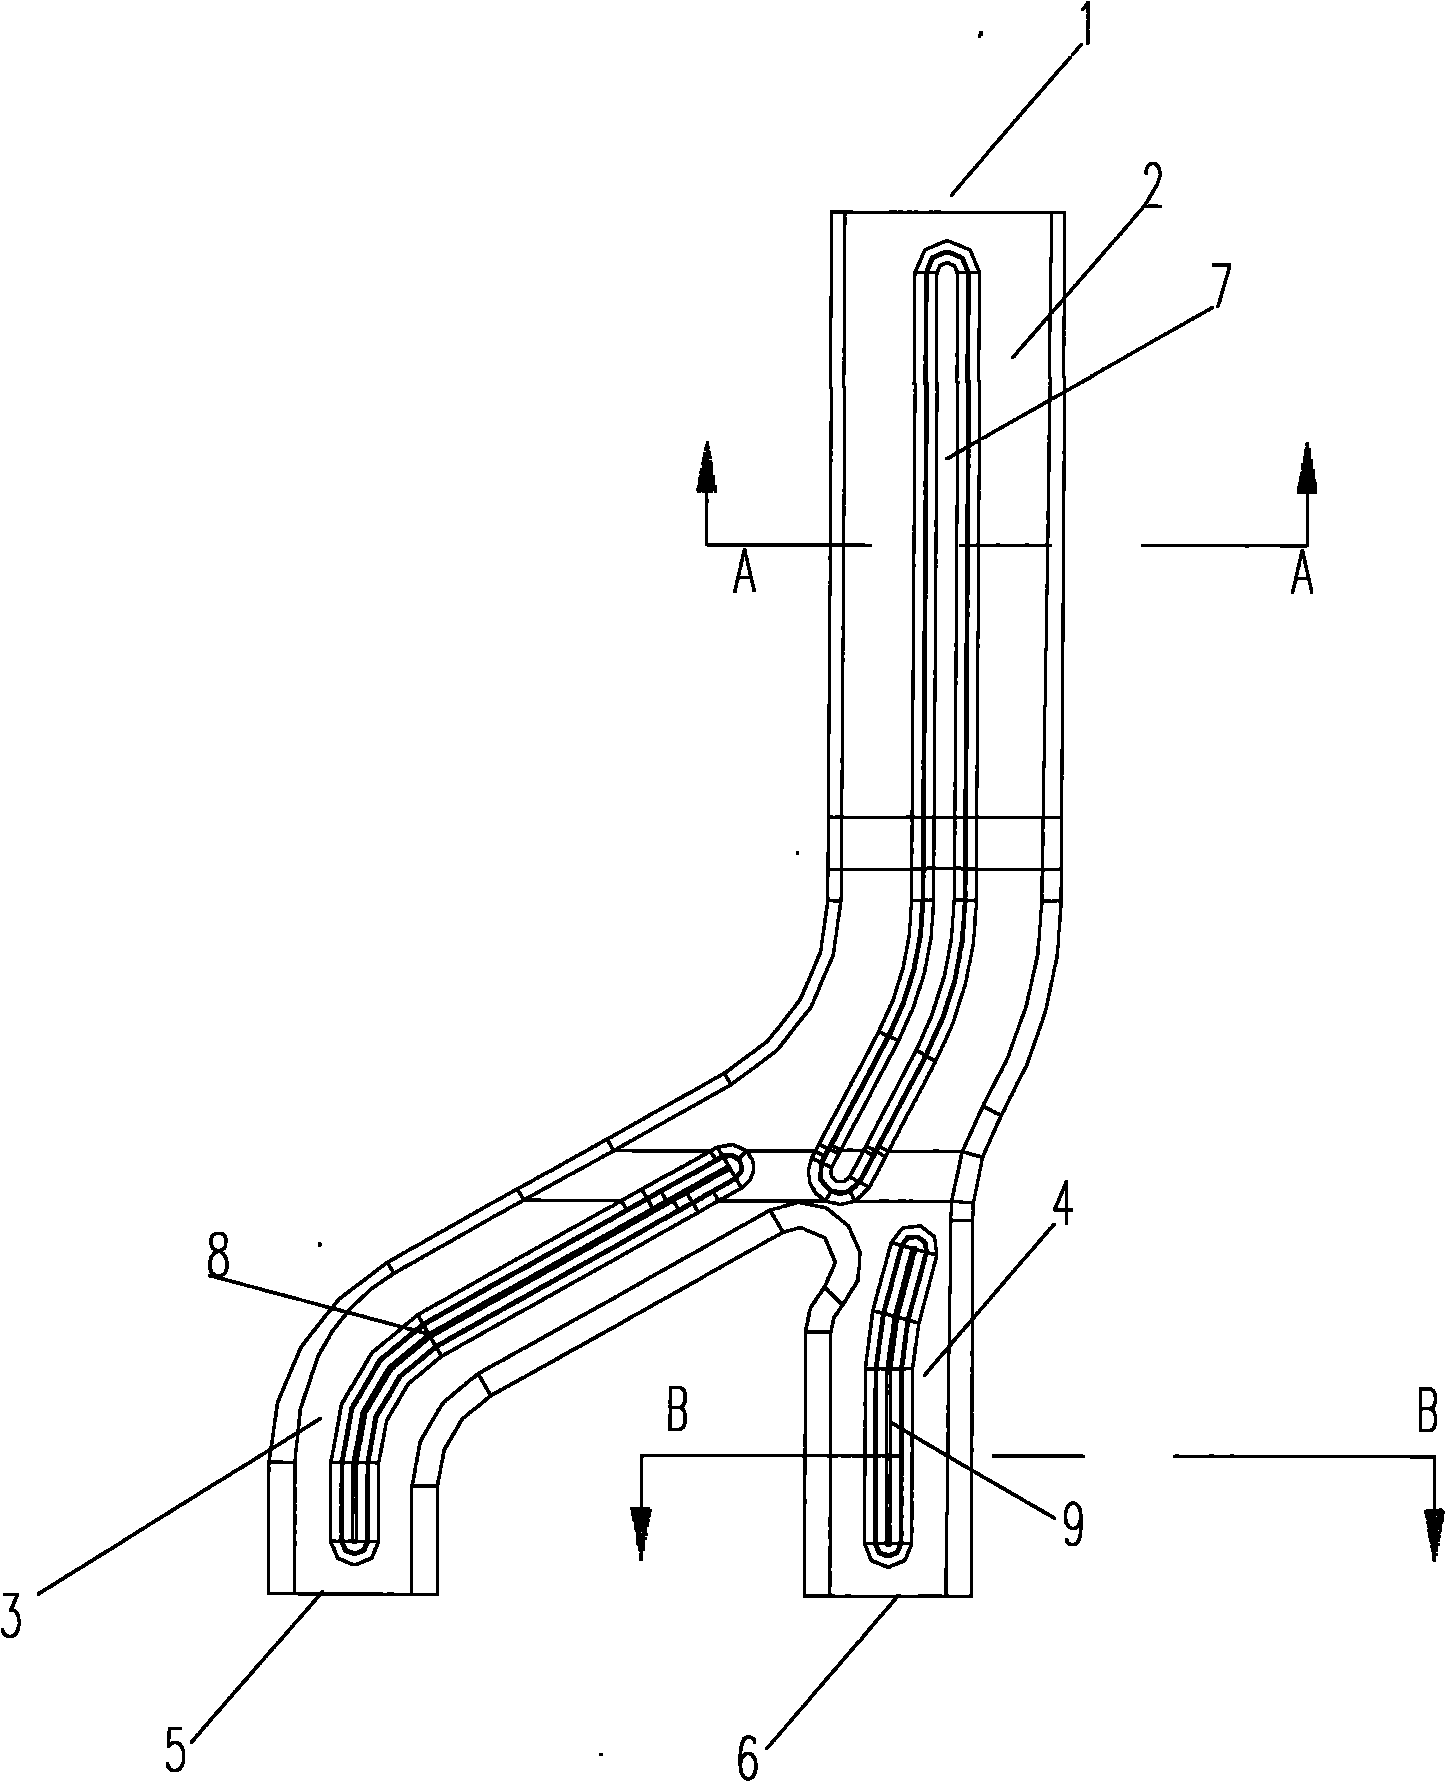 Return air duct and refrigerator with same